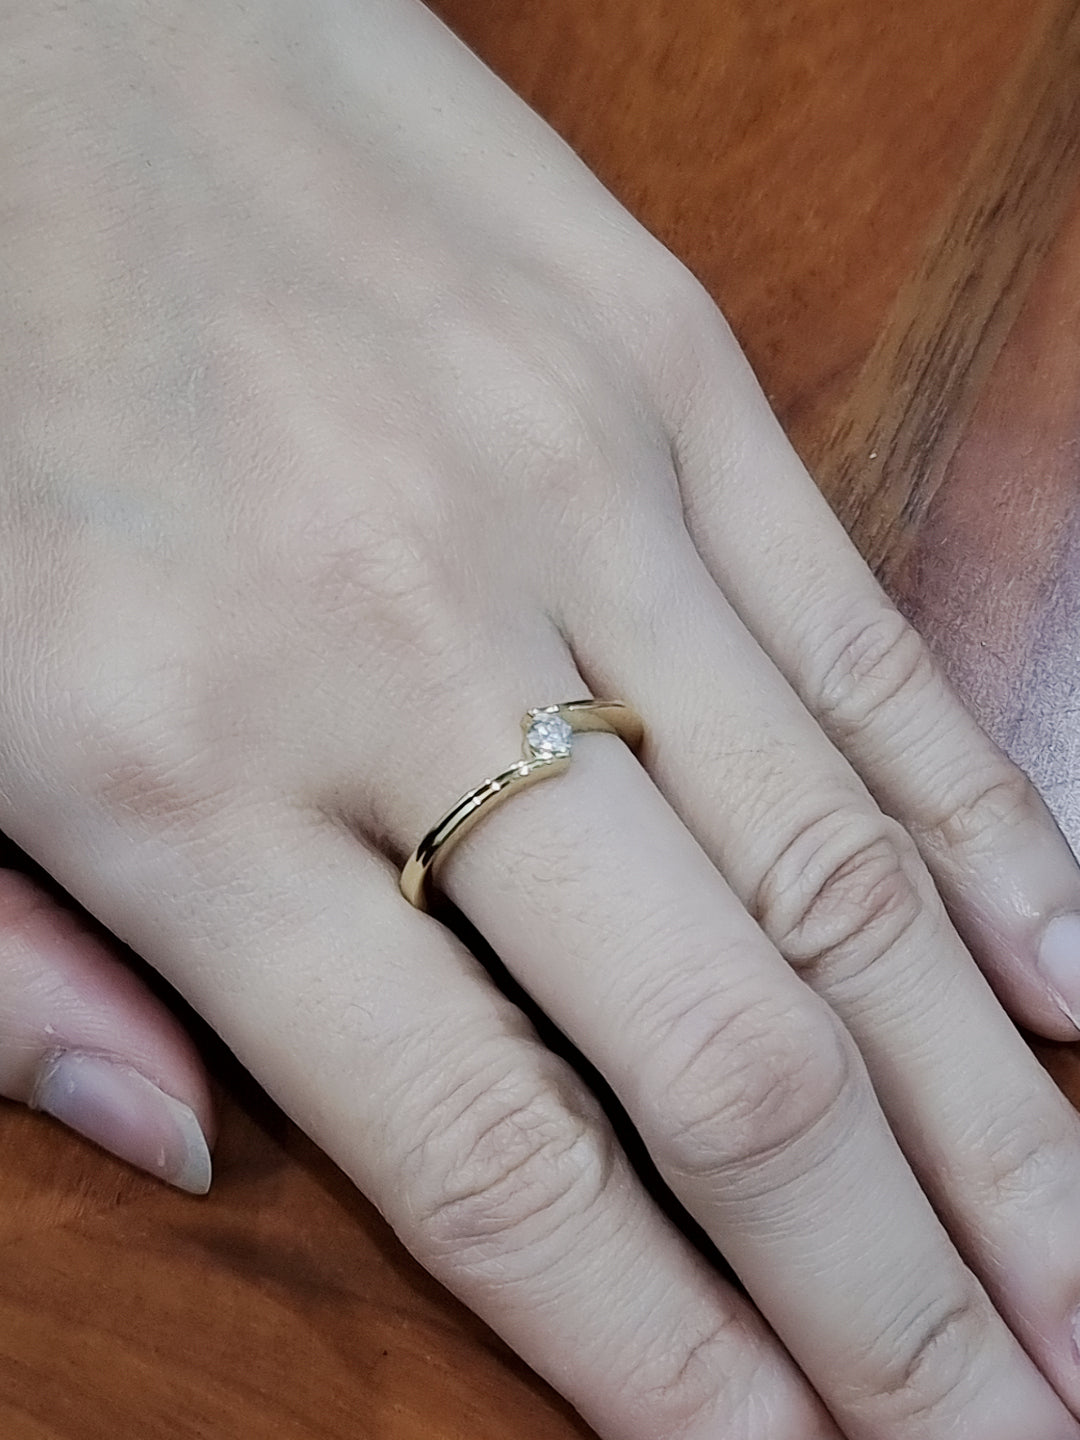 Solitaire Diamond Ring In 18k Yellow Gold.